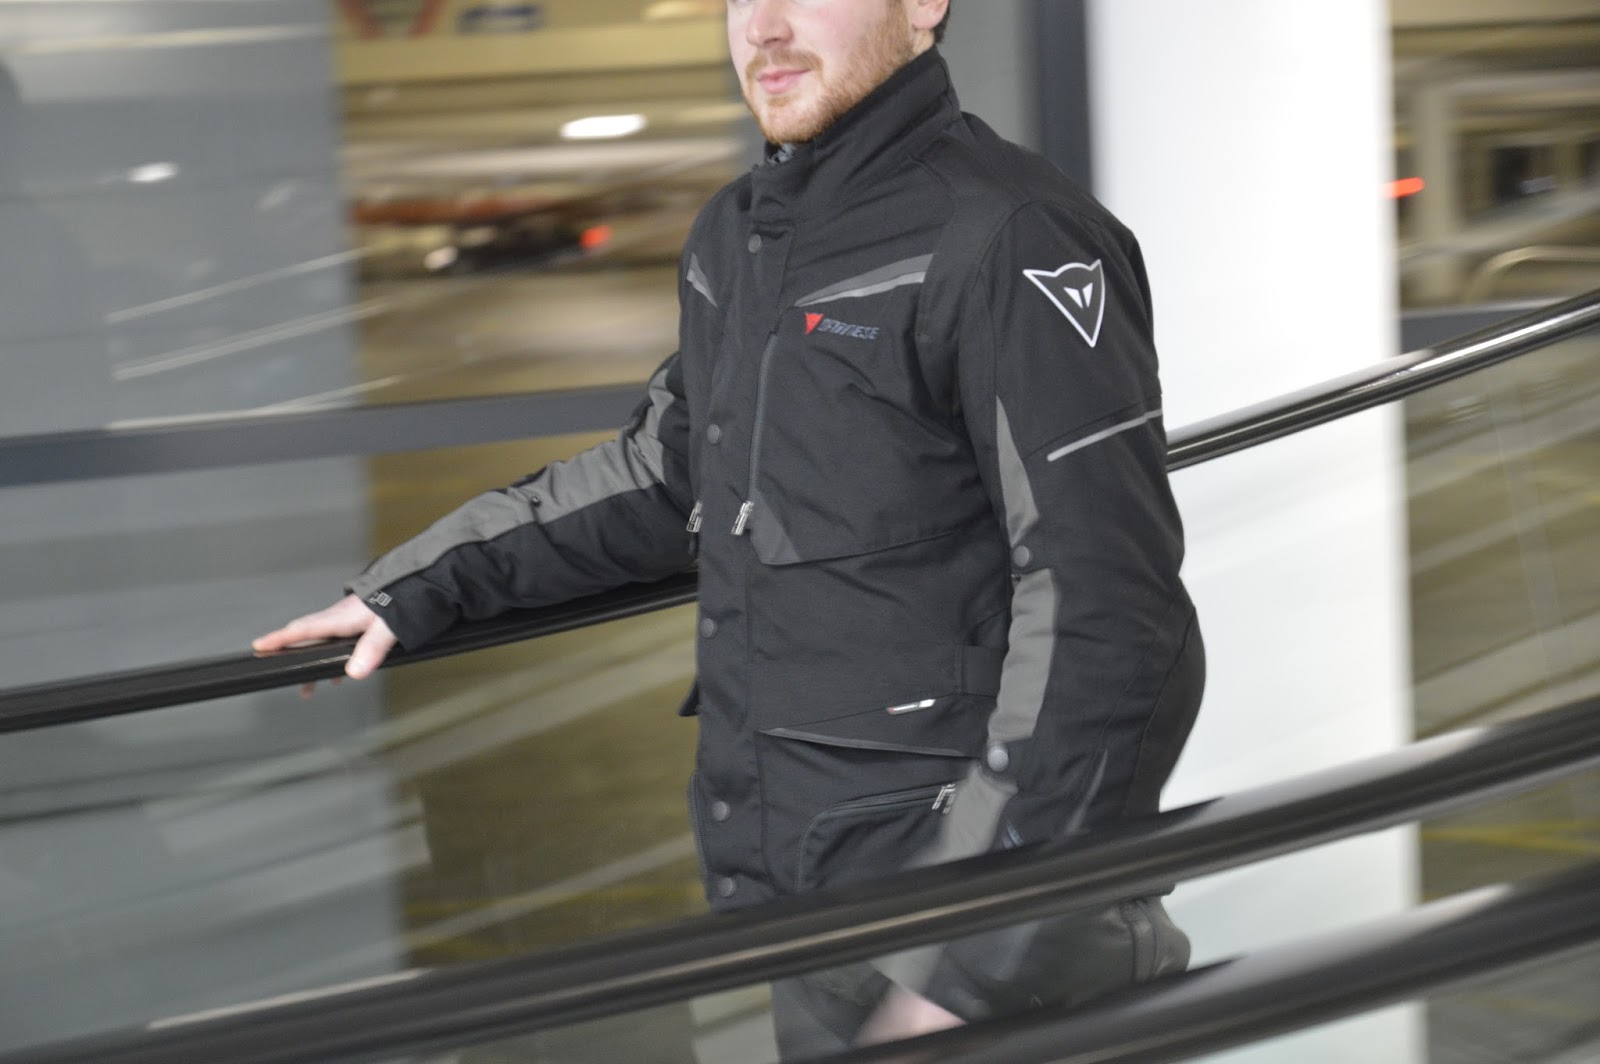 Dainese Tempest D-Dry Motorcycle Jacket Review